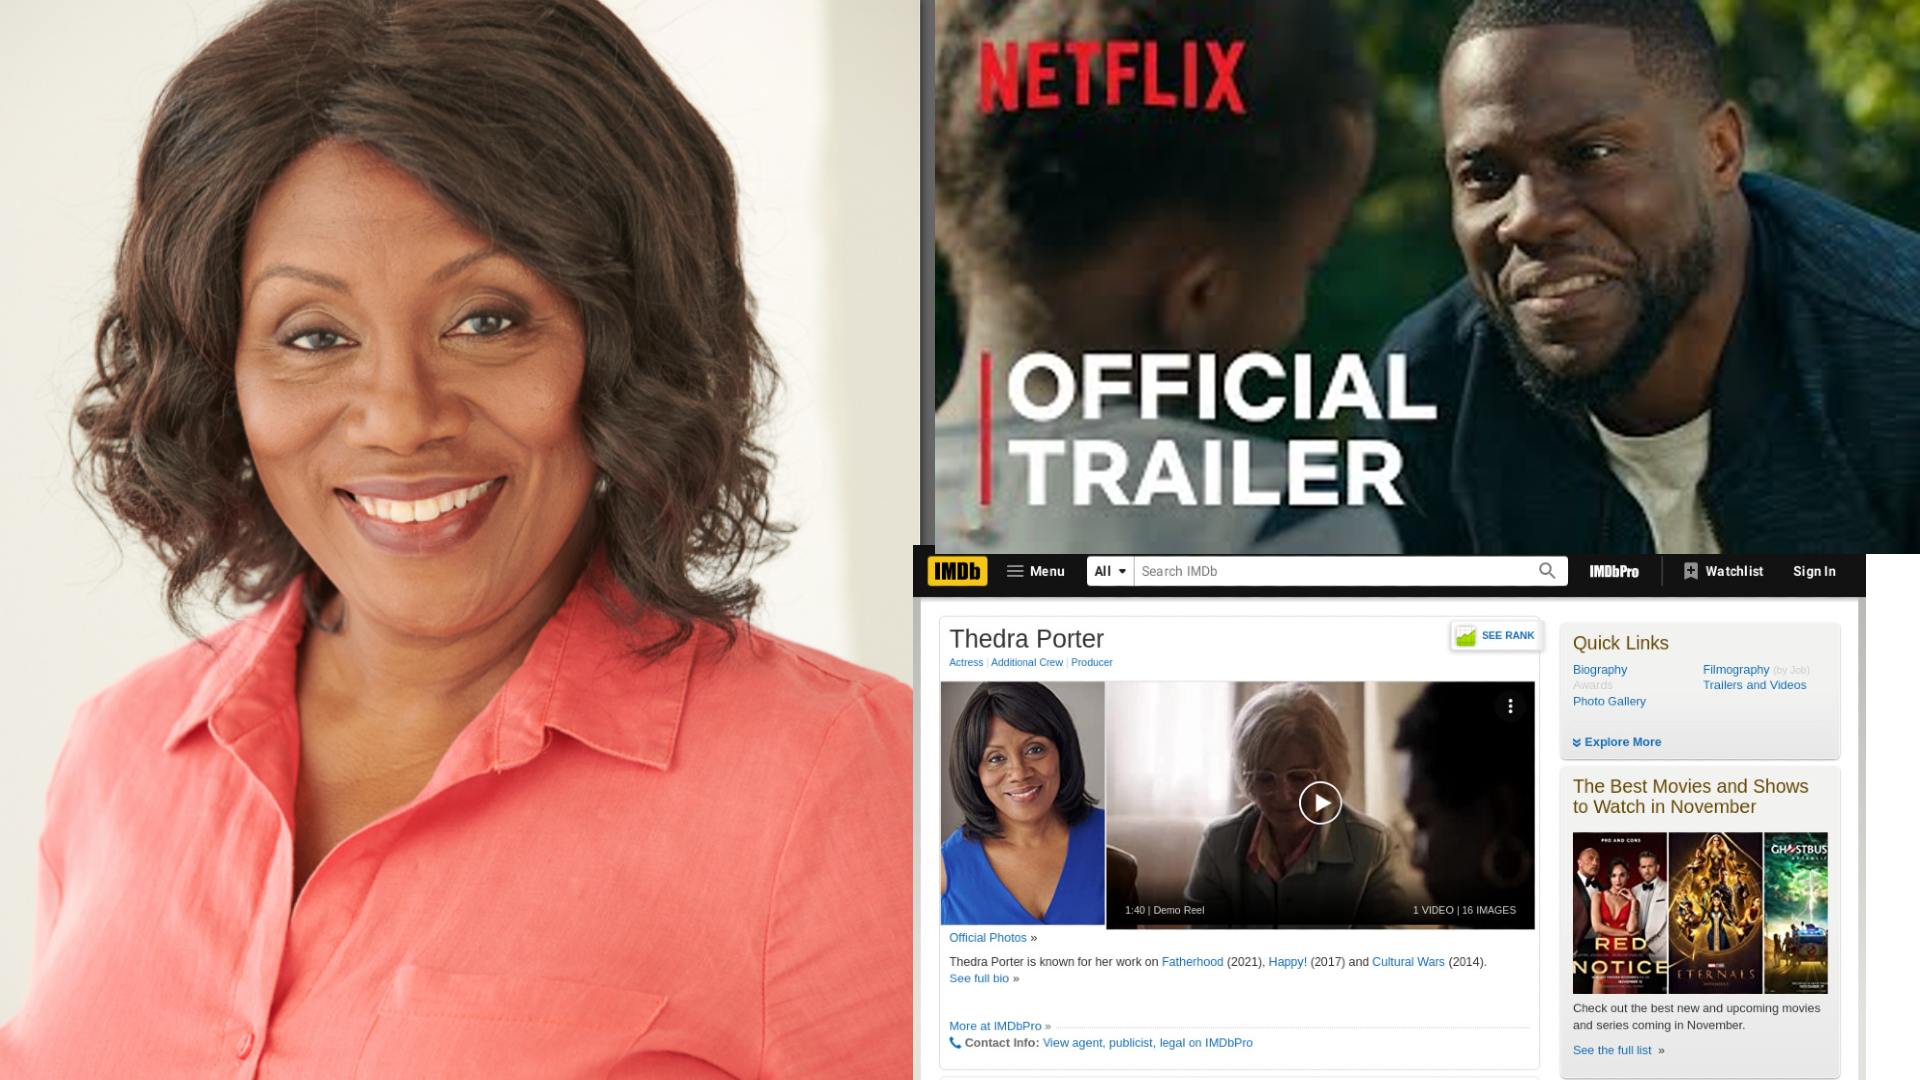 Hollywood News: Actress Thedra Porter Film Updates & Starring in Netflix Feature  ‘Fatherhood” ft Kevin Hart!